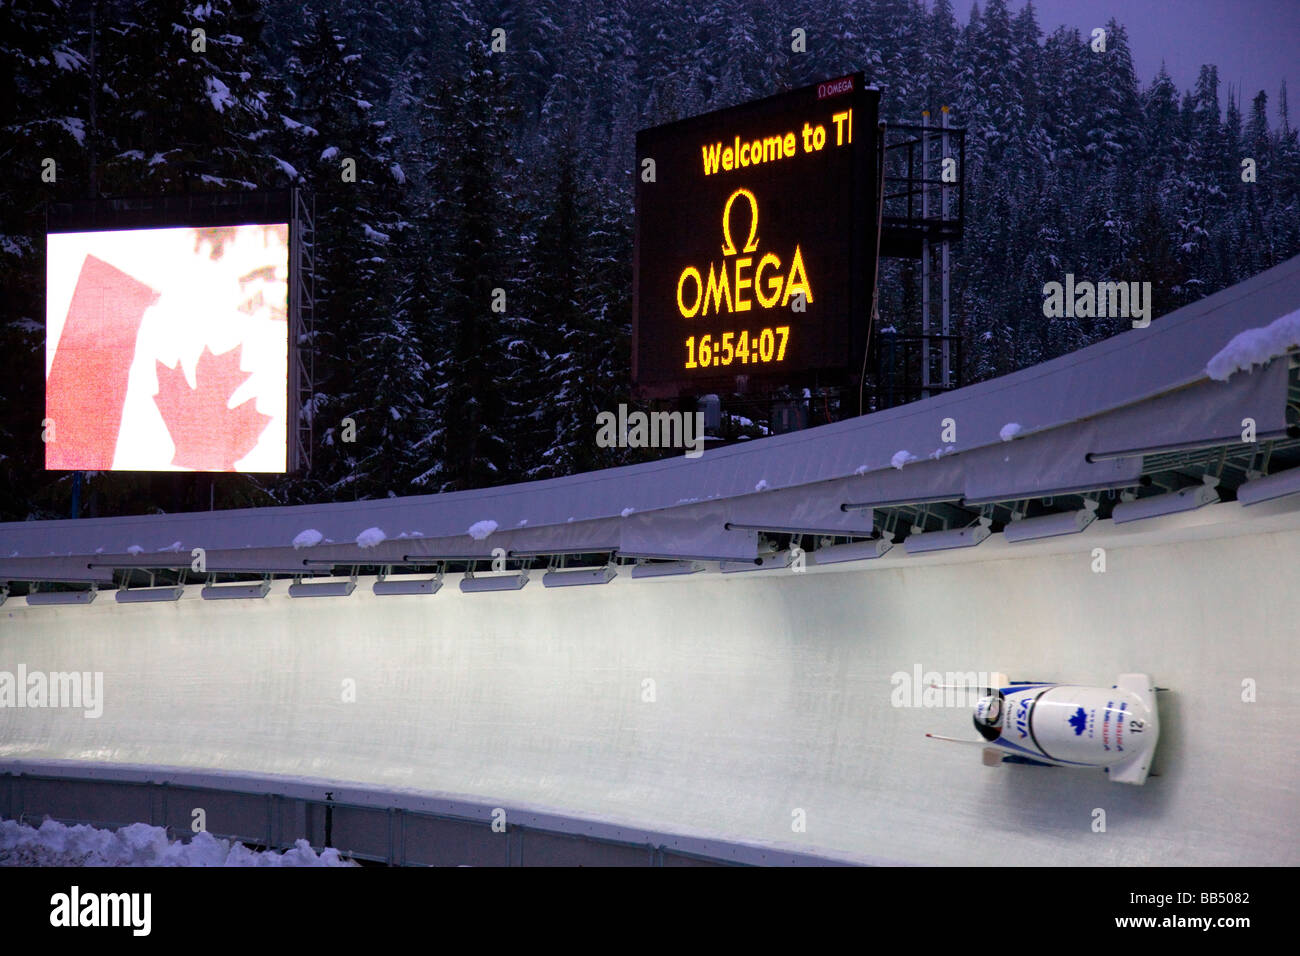 A bobsled at the Whistler Sliding Centre a sports venue for the 2010 Vancouver Winter Olympics Whistler British Columbia Canada Stock Photo